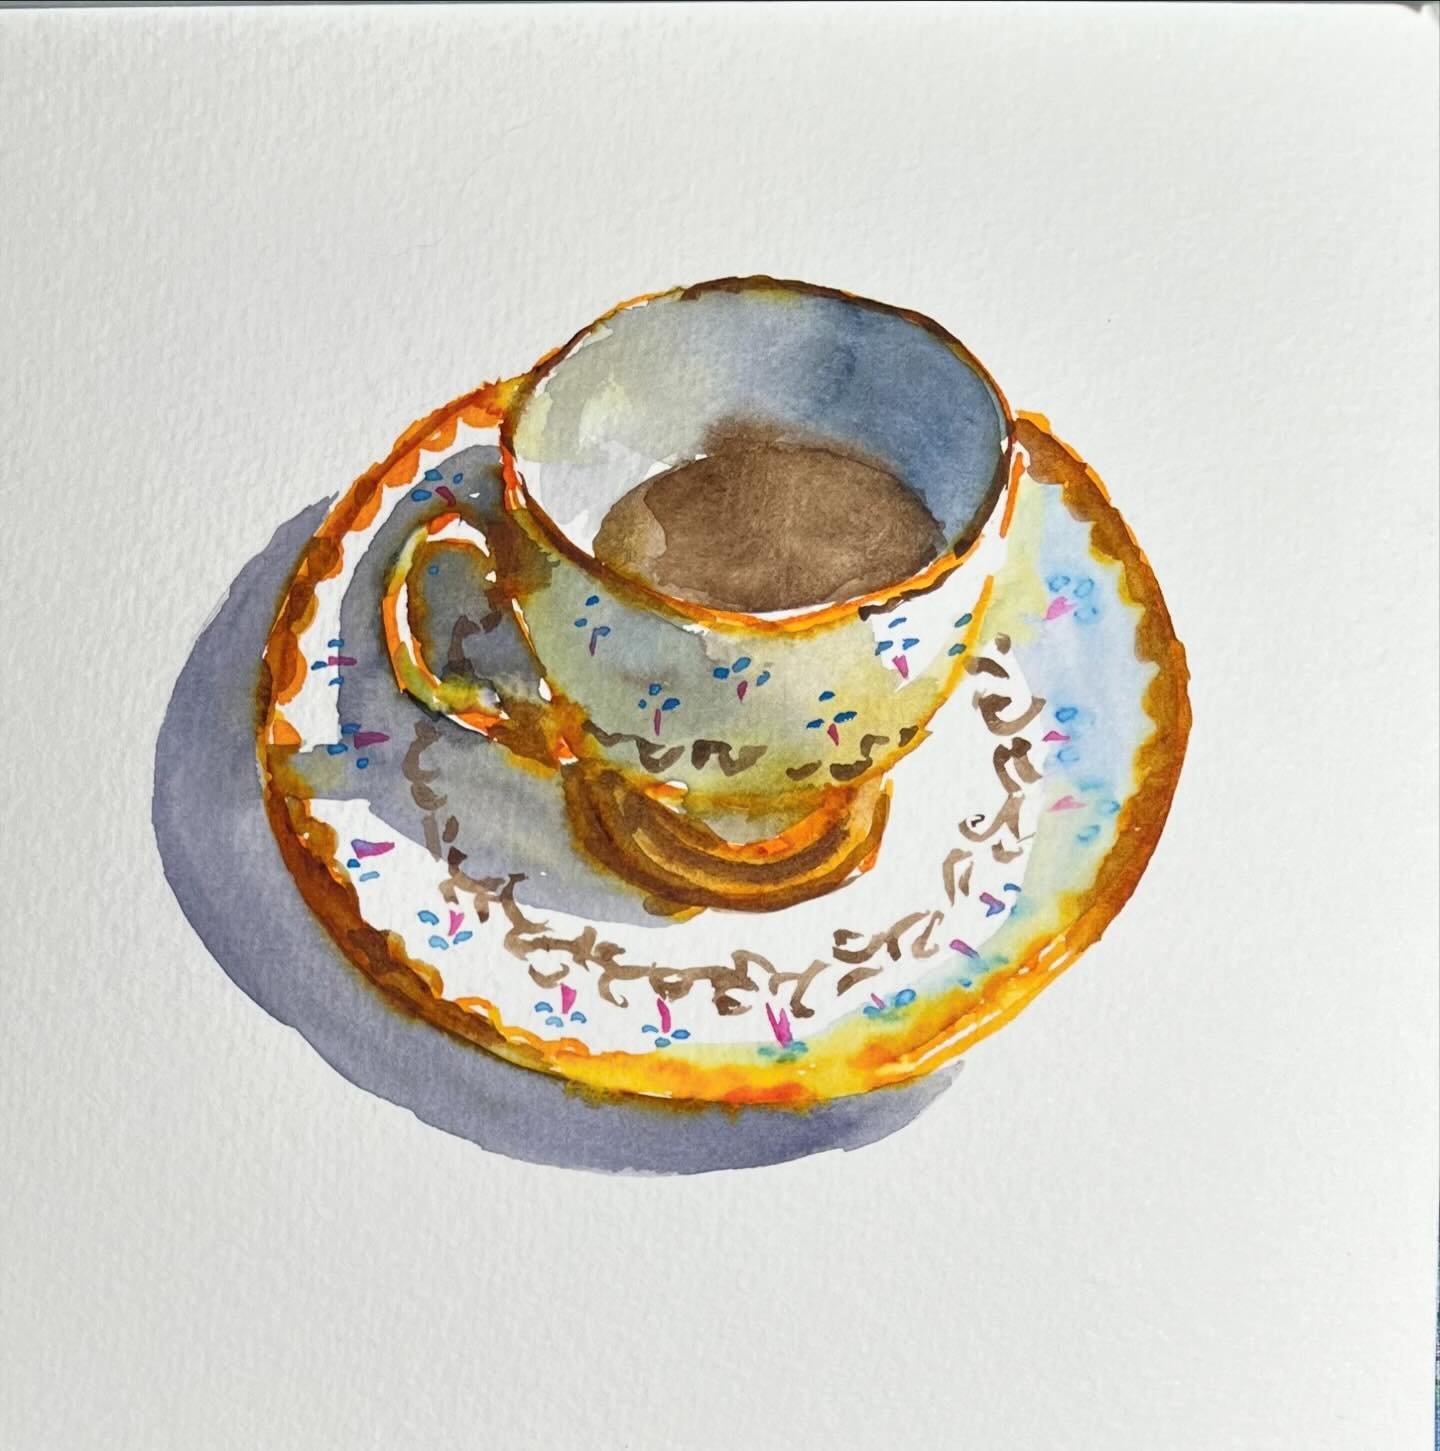 I feel out of practice with teacups. Two sketches of a lovely gift from @maymegillham #sketchbook #sketchingnowteacups #inkandwatercolor #inkandwash